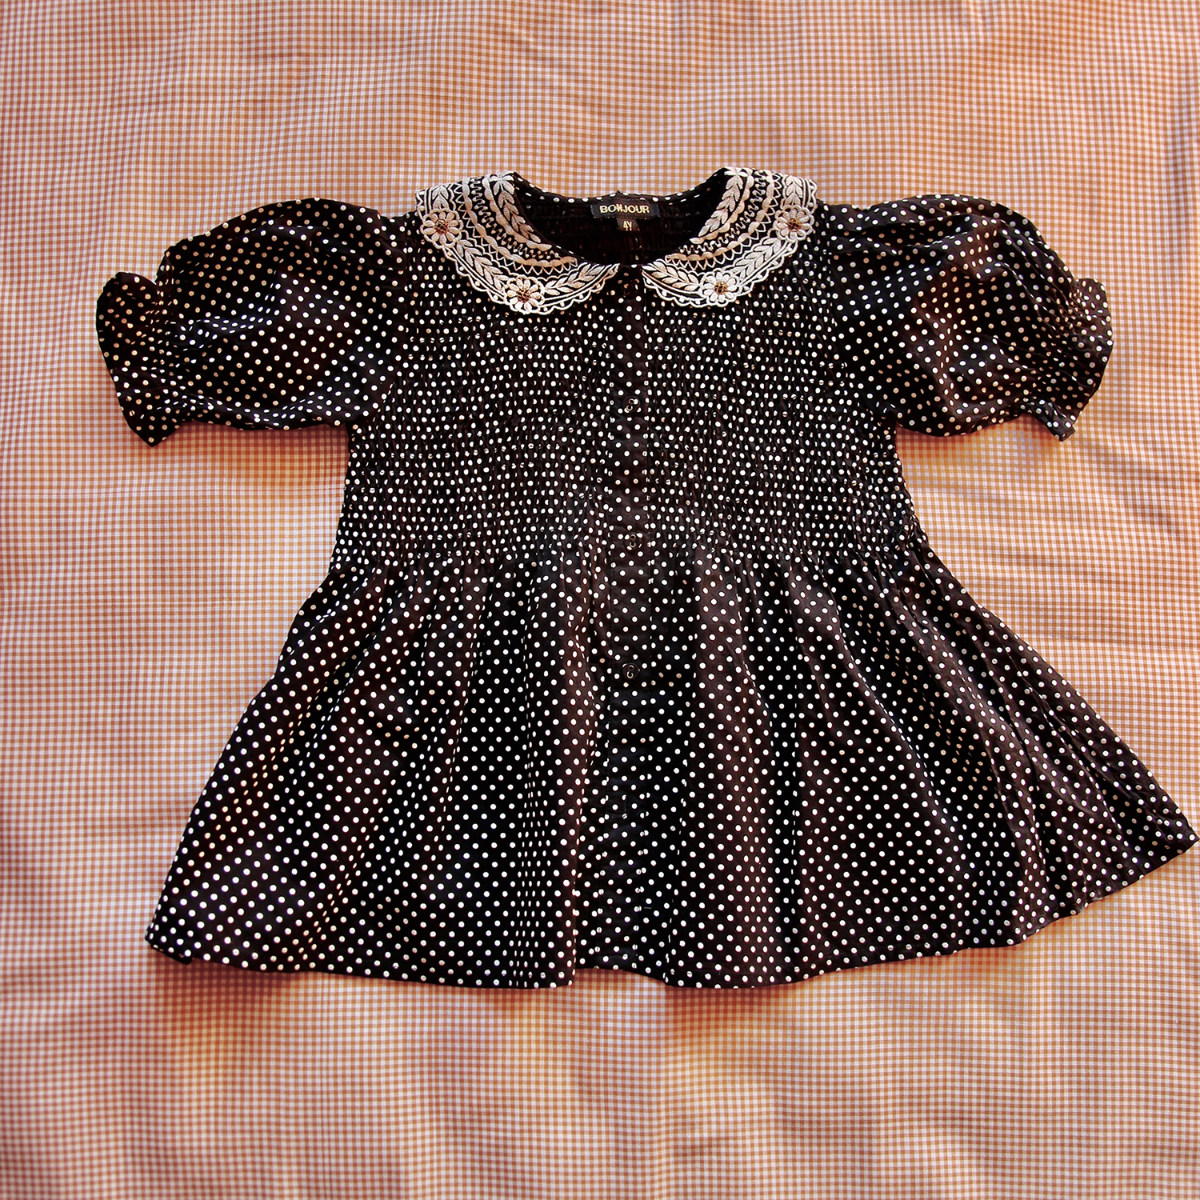 Blouse with embroidery collar(Black dots)